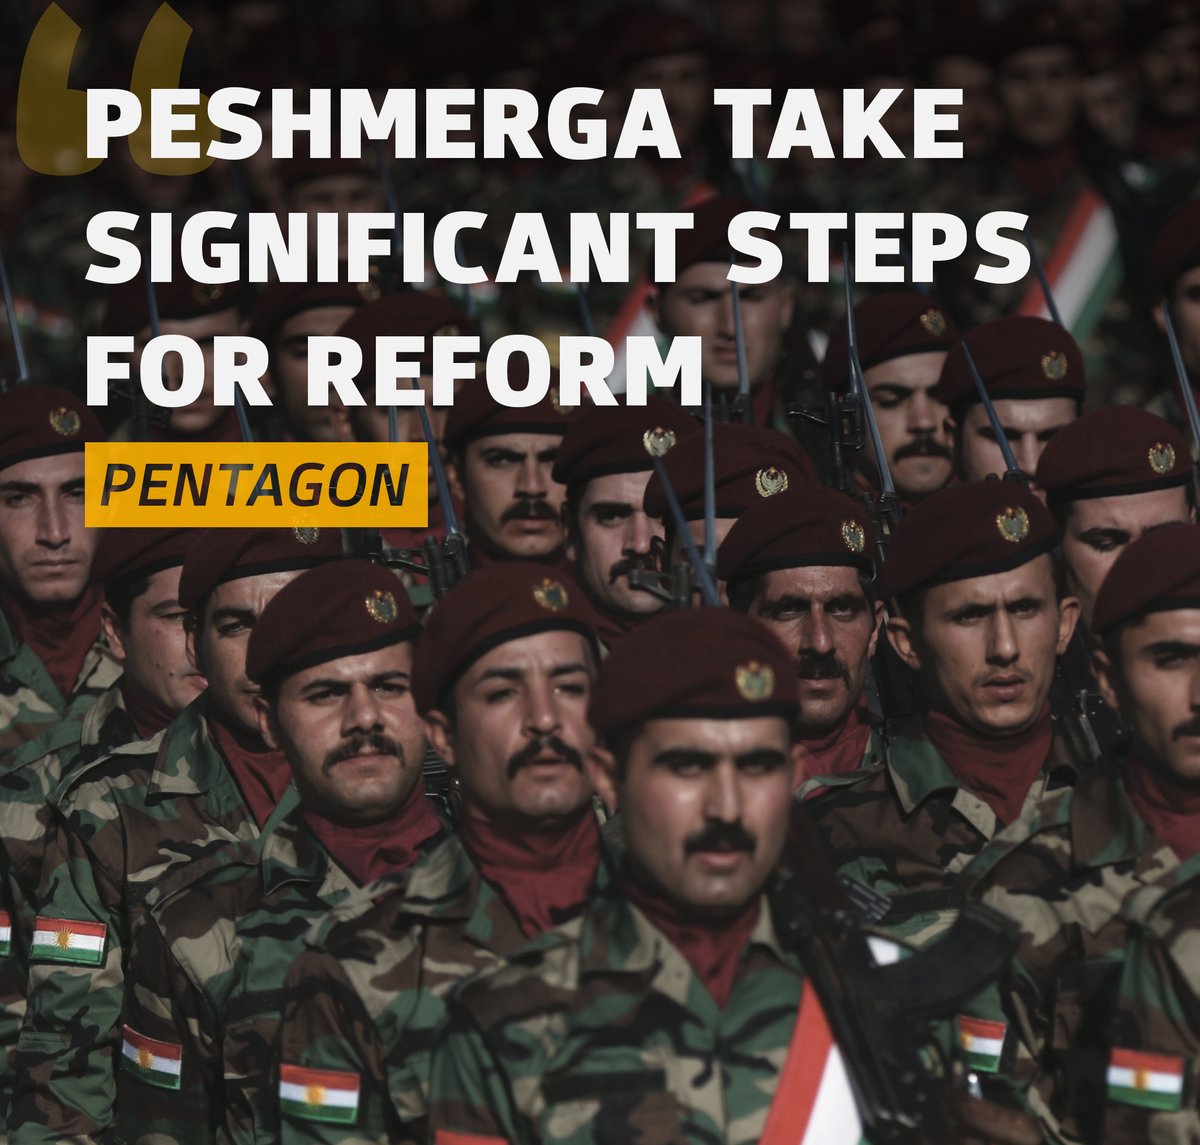 The Kurdish peshmerga forces have made incremental progress in warfighting functions and have taken significant steps toward reform goals, the Pentagon’s quarterly inspector general report to the U.S. Congress said.

Read more: kurdistanchronicle.com/babat/3059